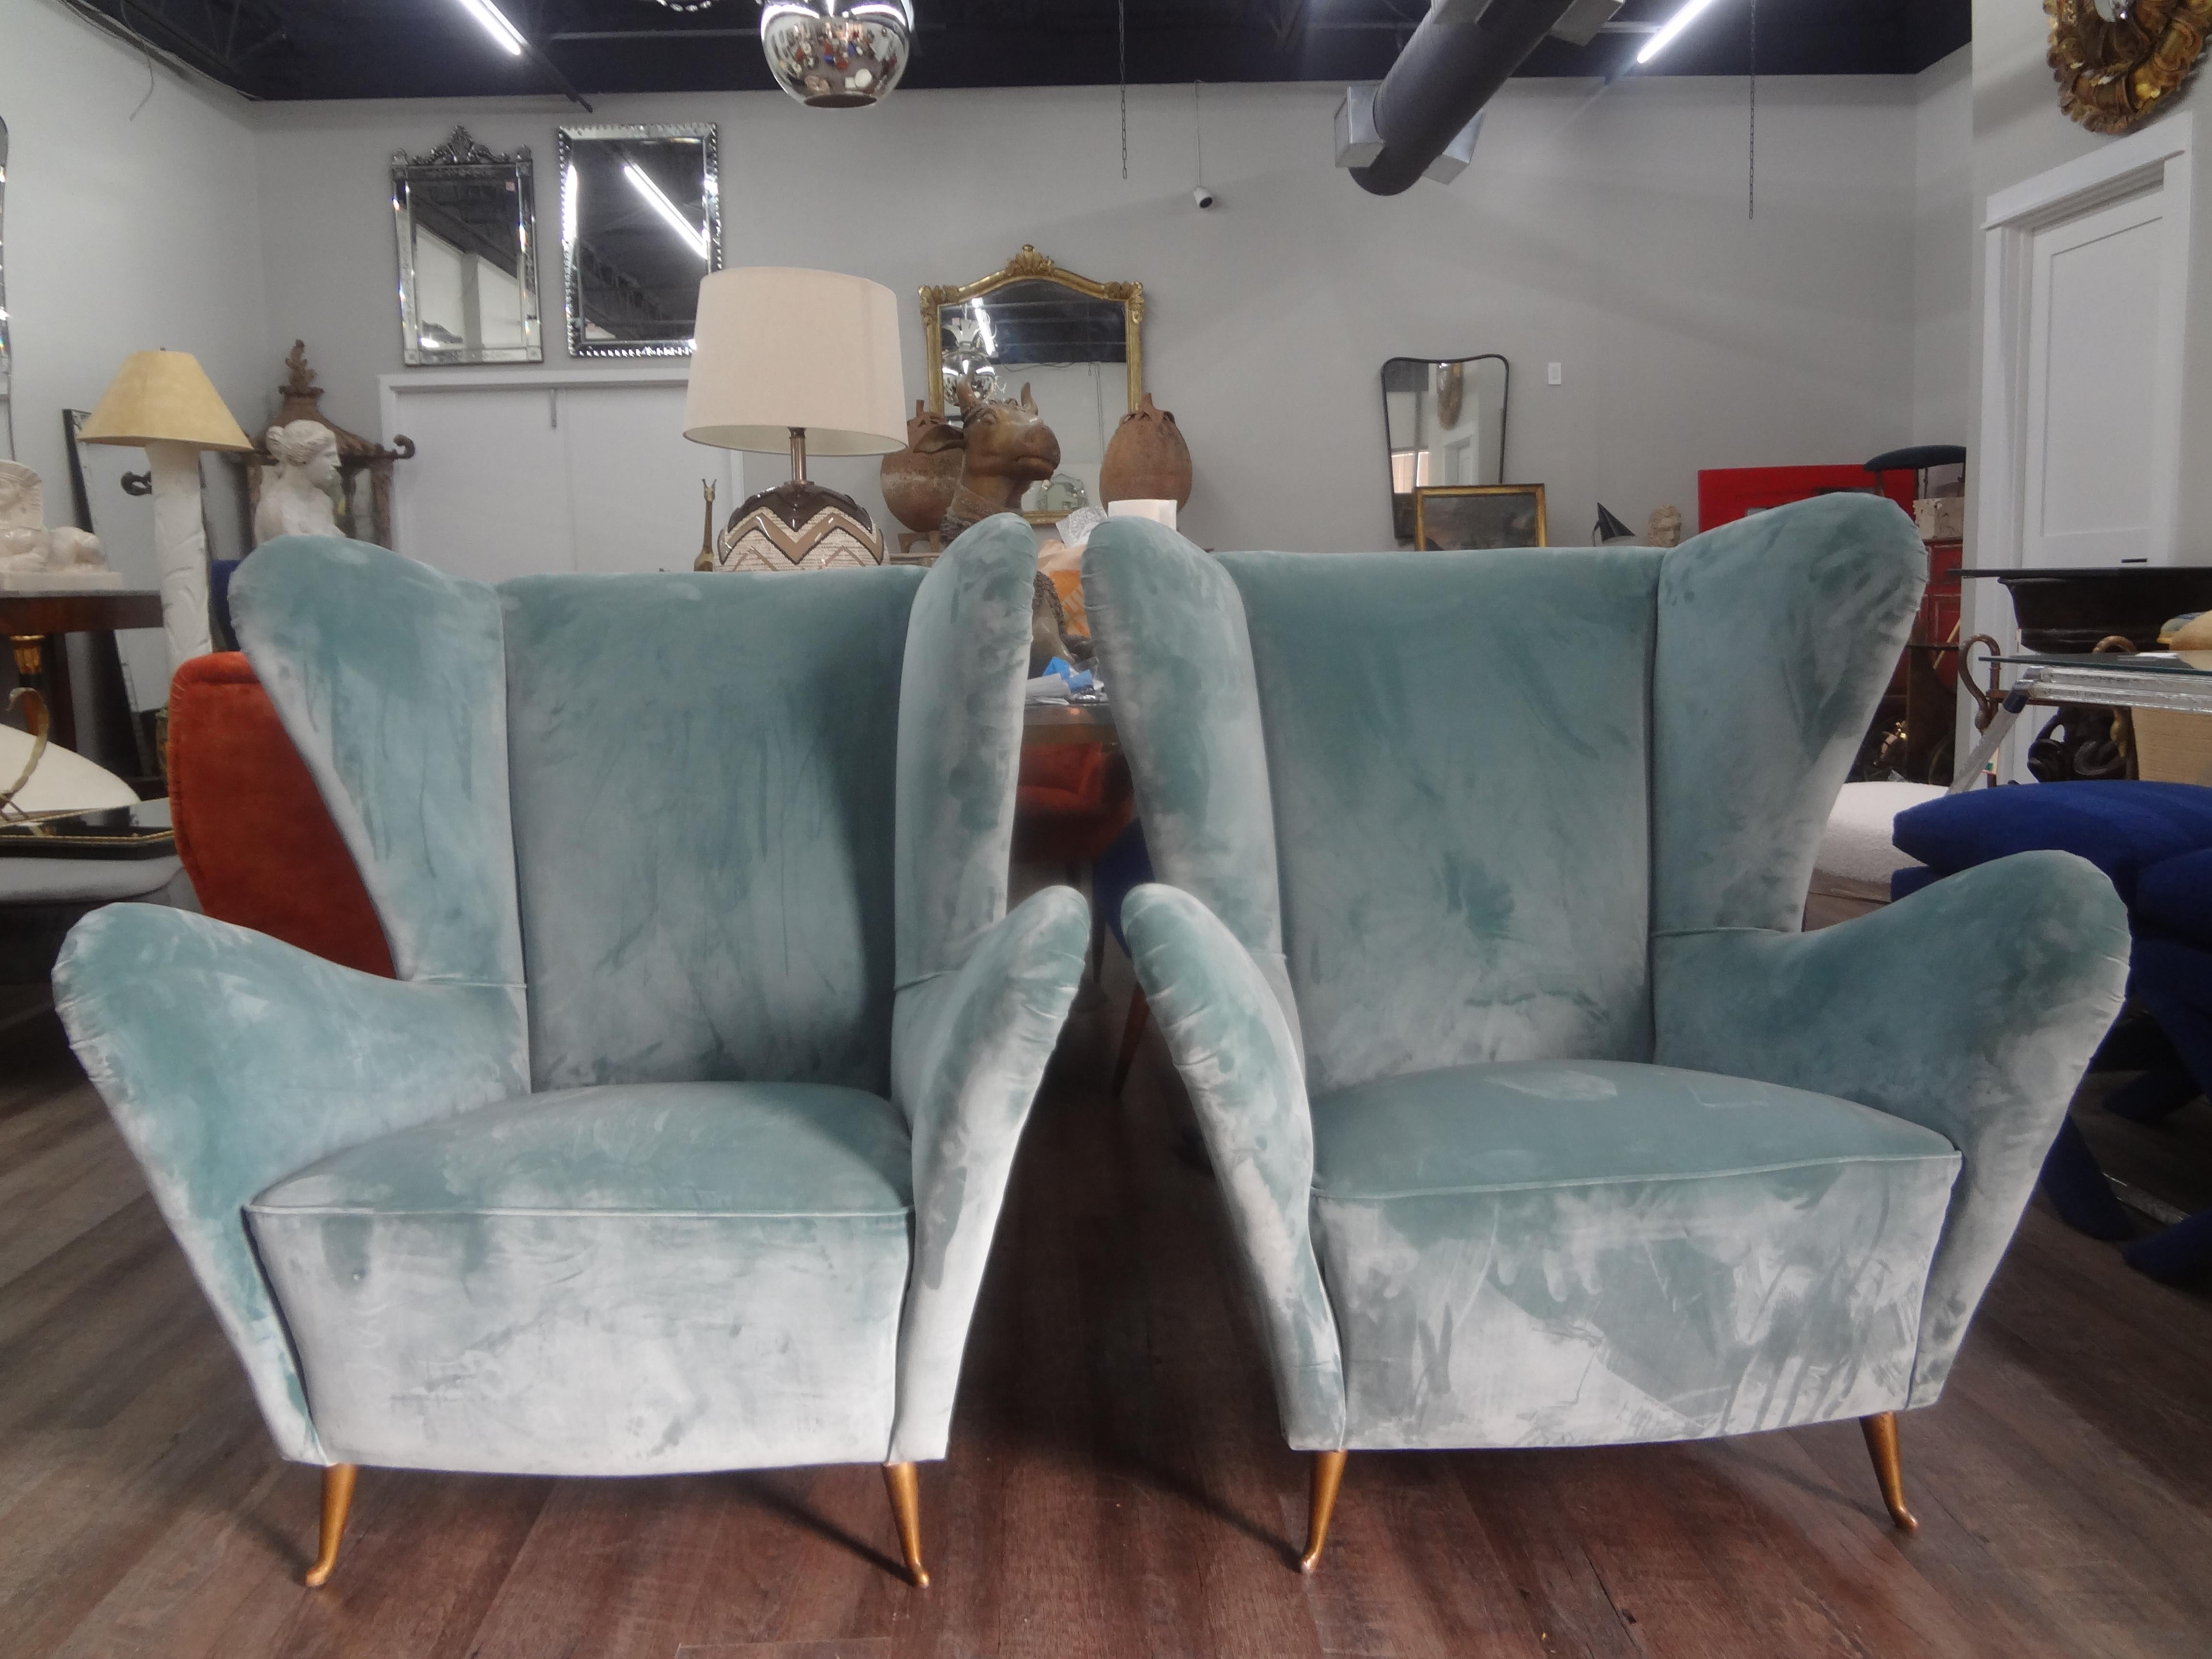 Pair of Italian Modern sculptural lounge chairs attributed to ISA Bergamo.
This stunning pair of Mid-Century Modern Italian lounge chairs, side chairs or wing chairs have a great sculptural back that is not only stylish but extremely comfortable.